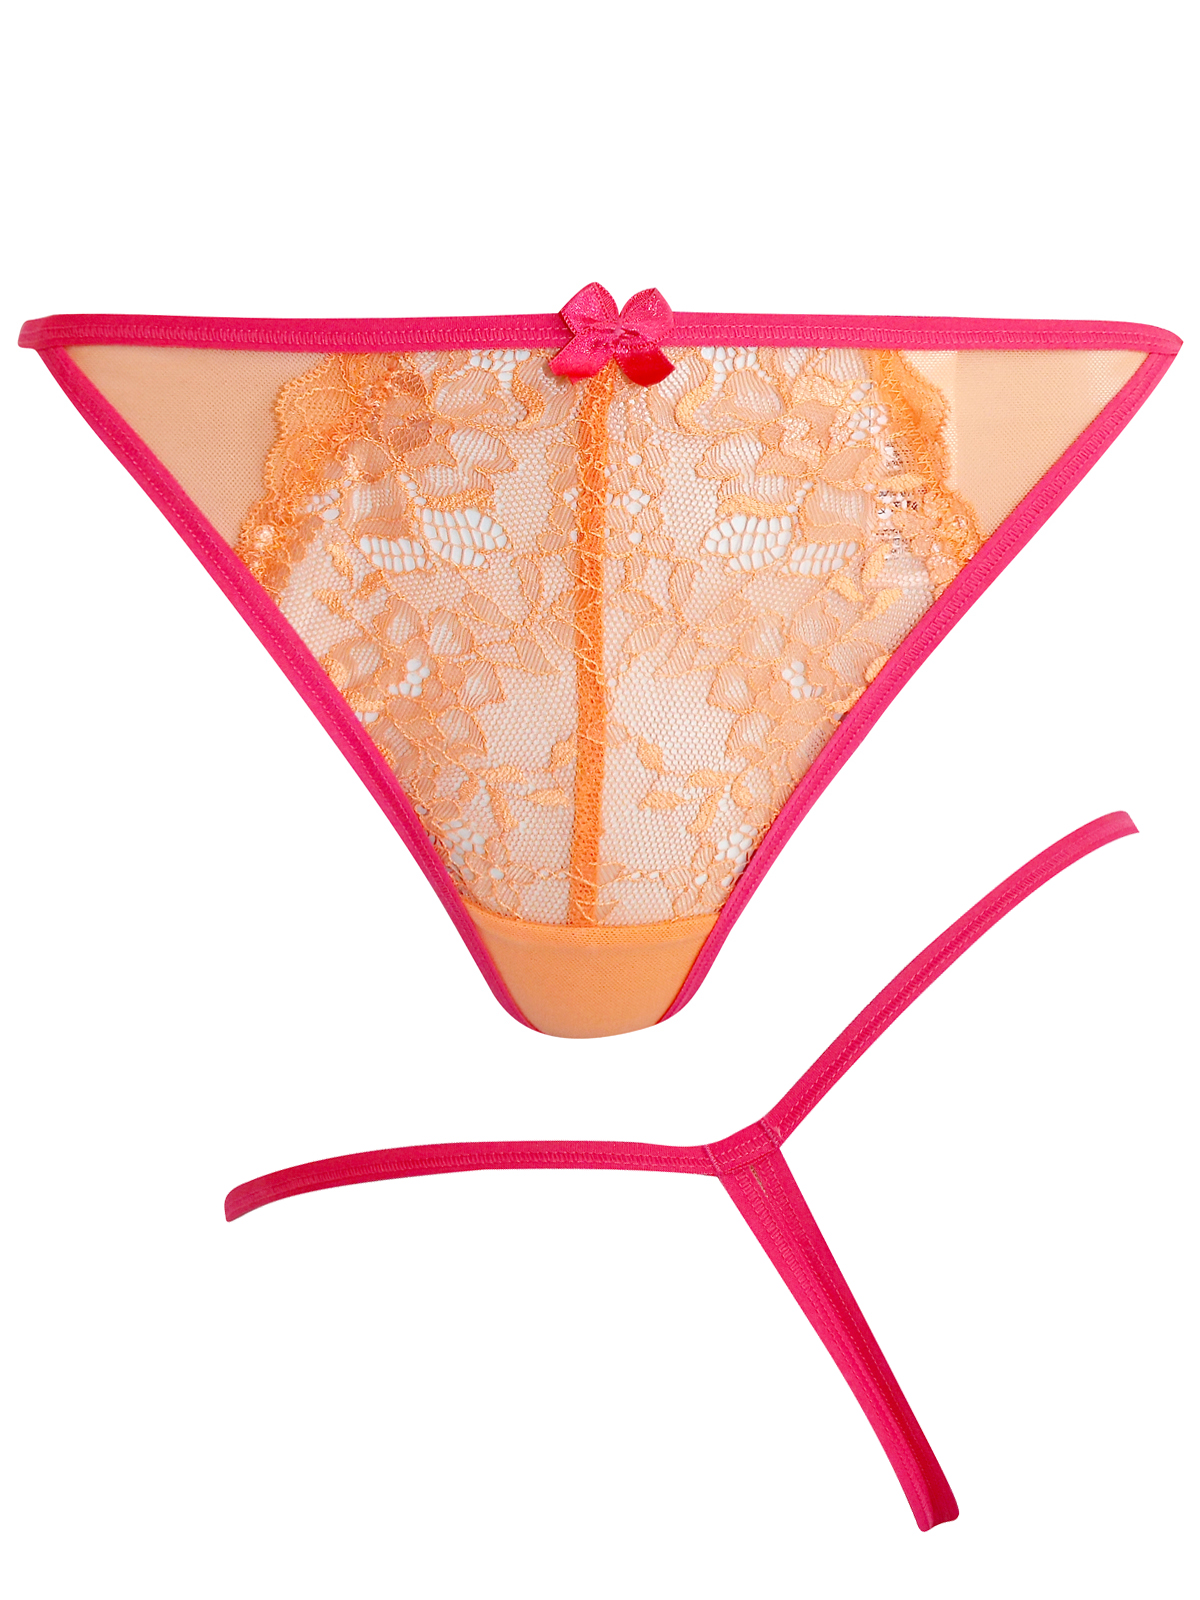 George G Orge Orange Contrast Trim Lace Thong Size To